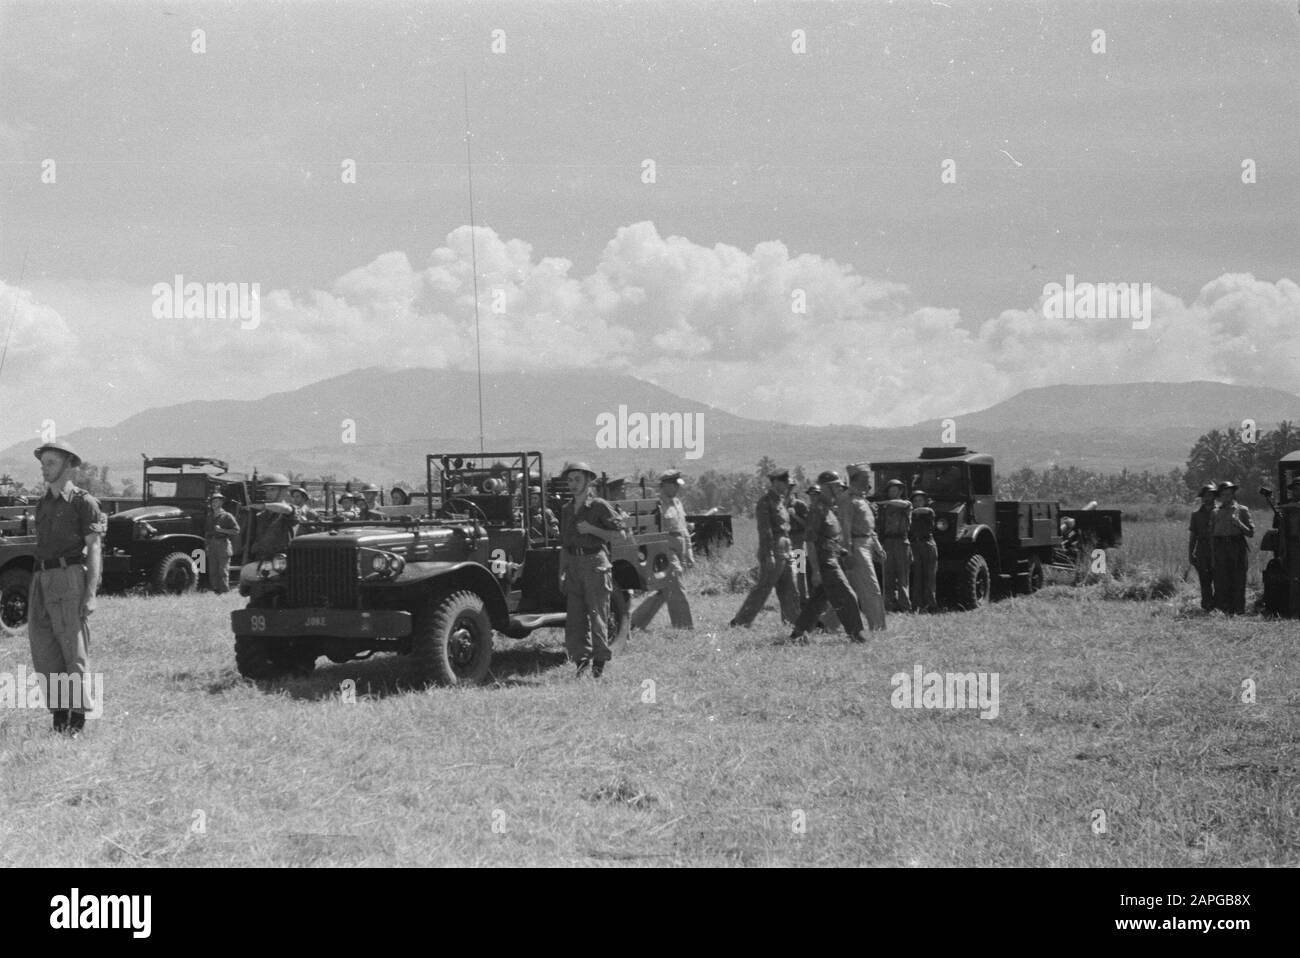 Inspection by General S. de Waal (commander B-division) Description: Collection Photo Collection Service for Army Contacts Indonesia, photon number 199-2-2 Date: April 1947 Location: Indonesia, Dutch East Indies Stock Photo